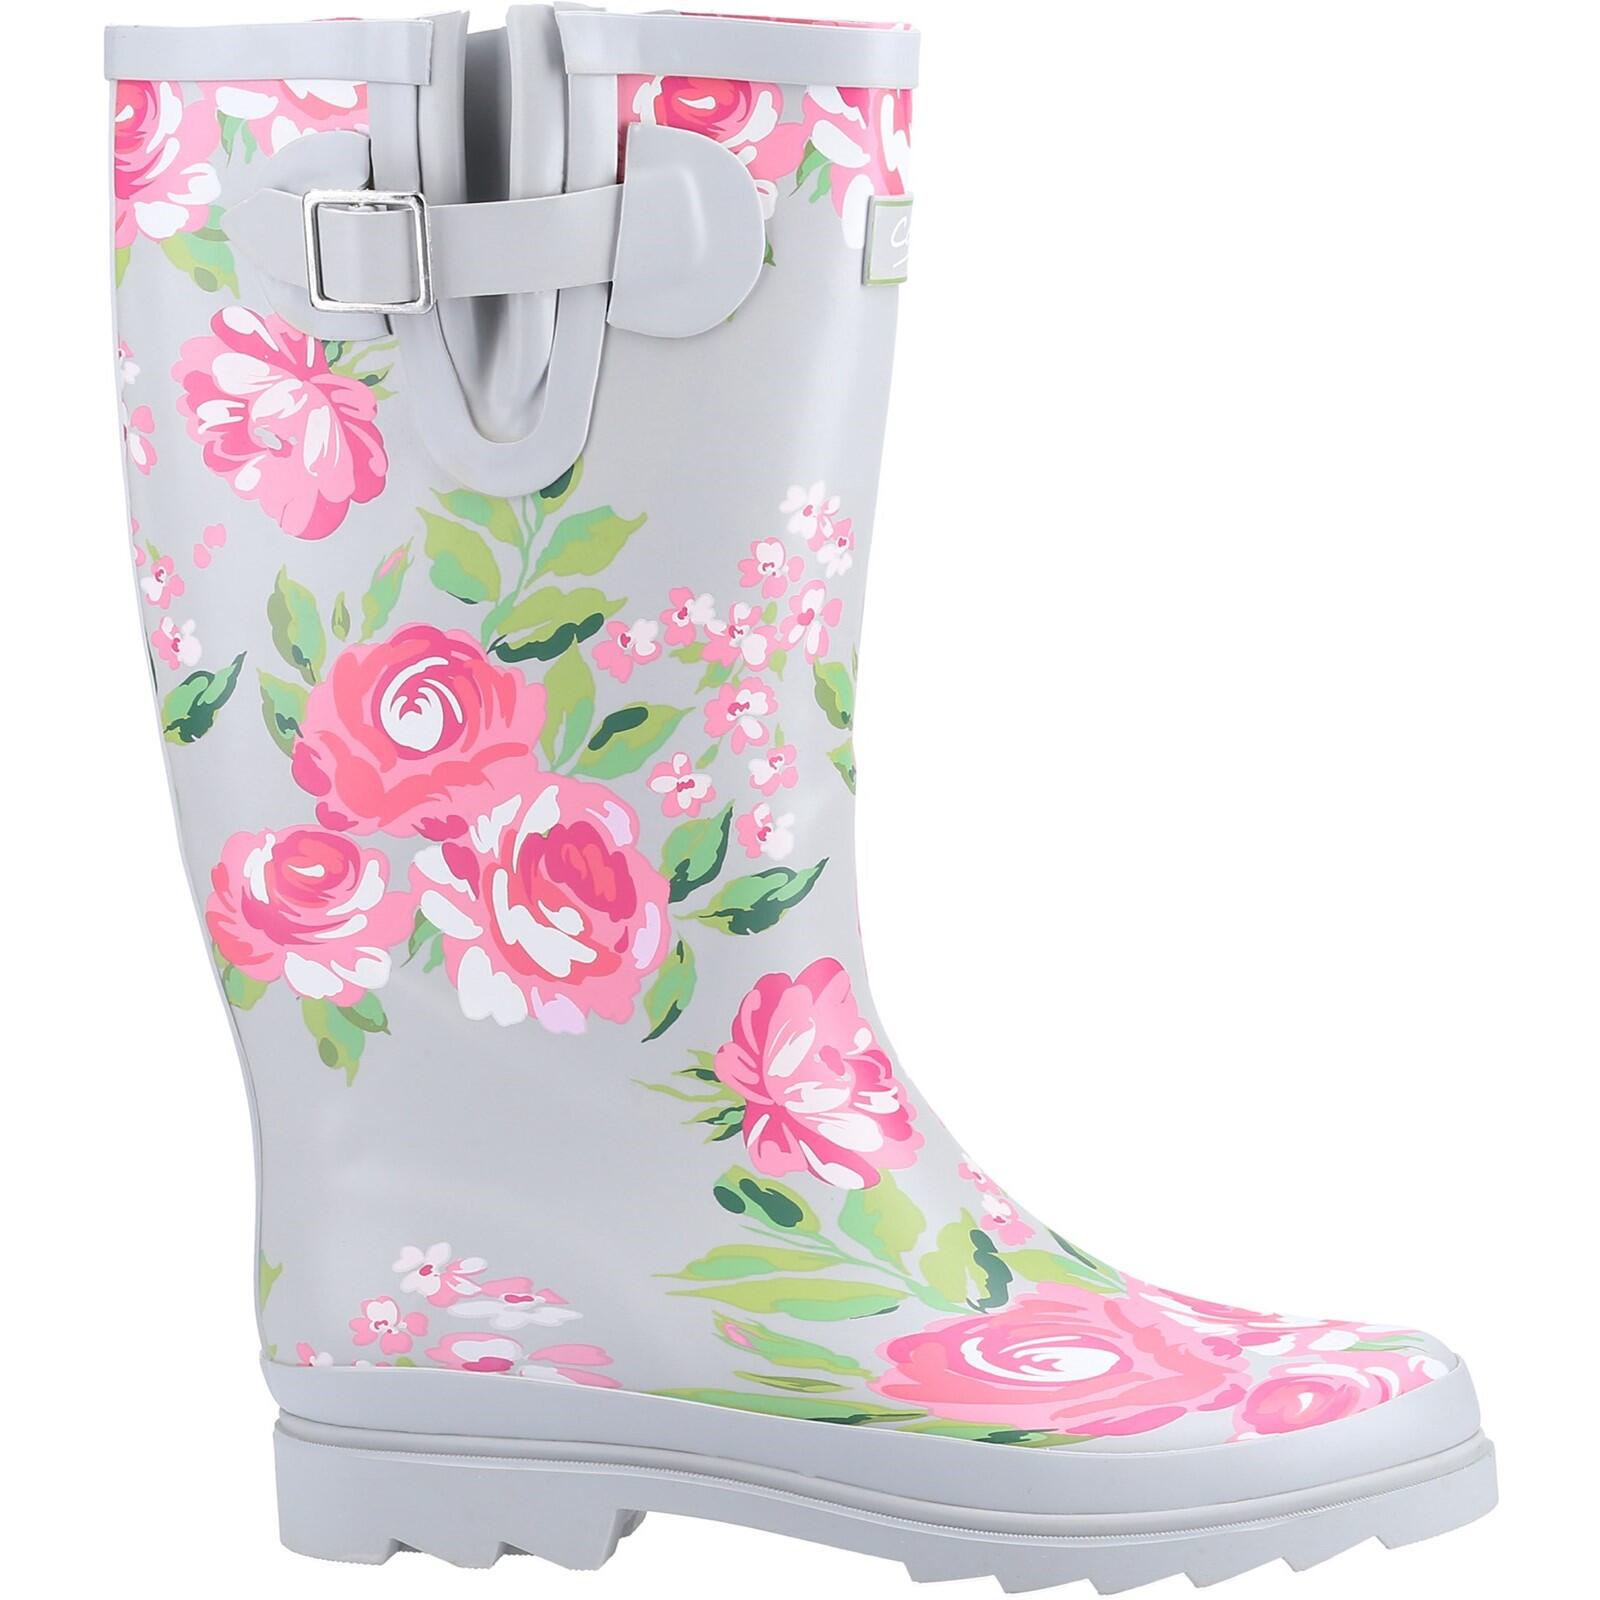 COTSWOLD Blossom Patterned Wellingtons PINK